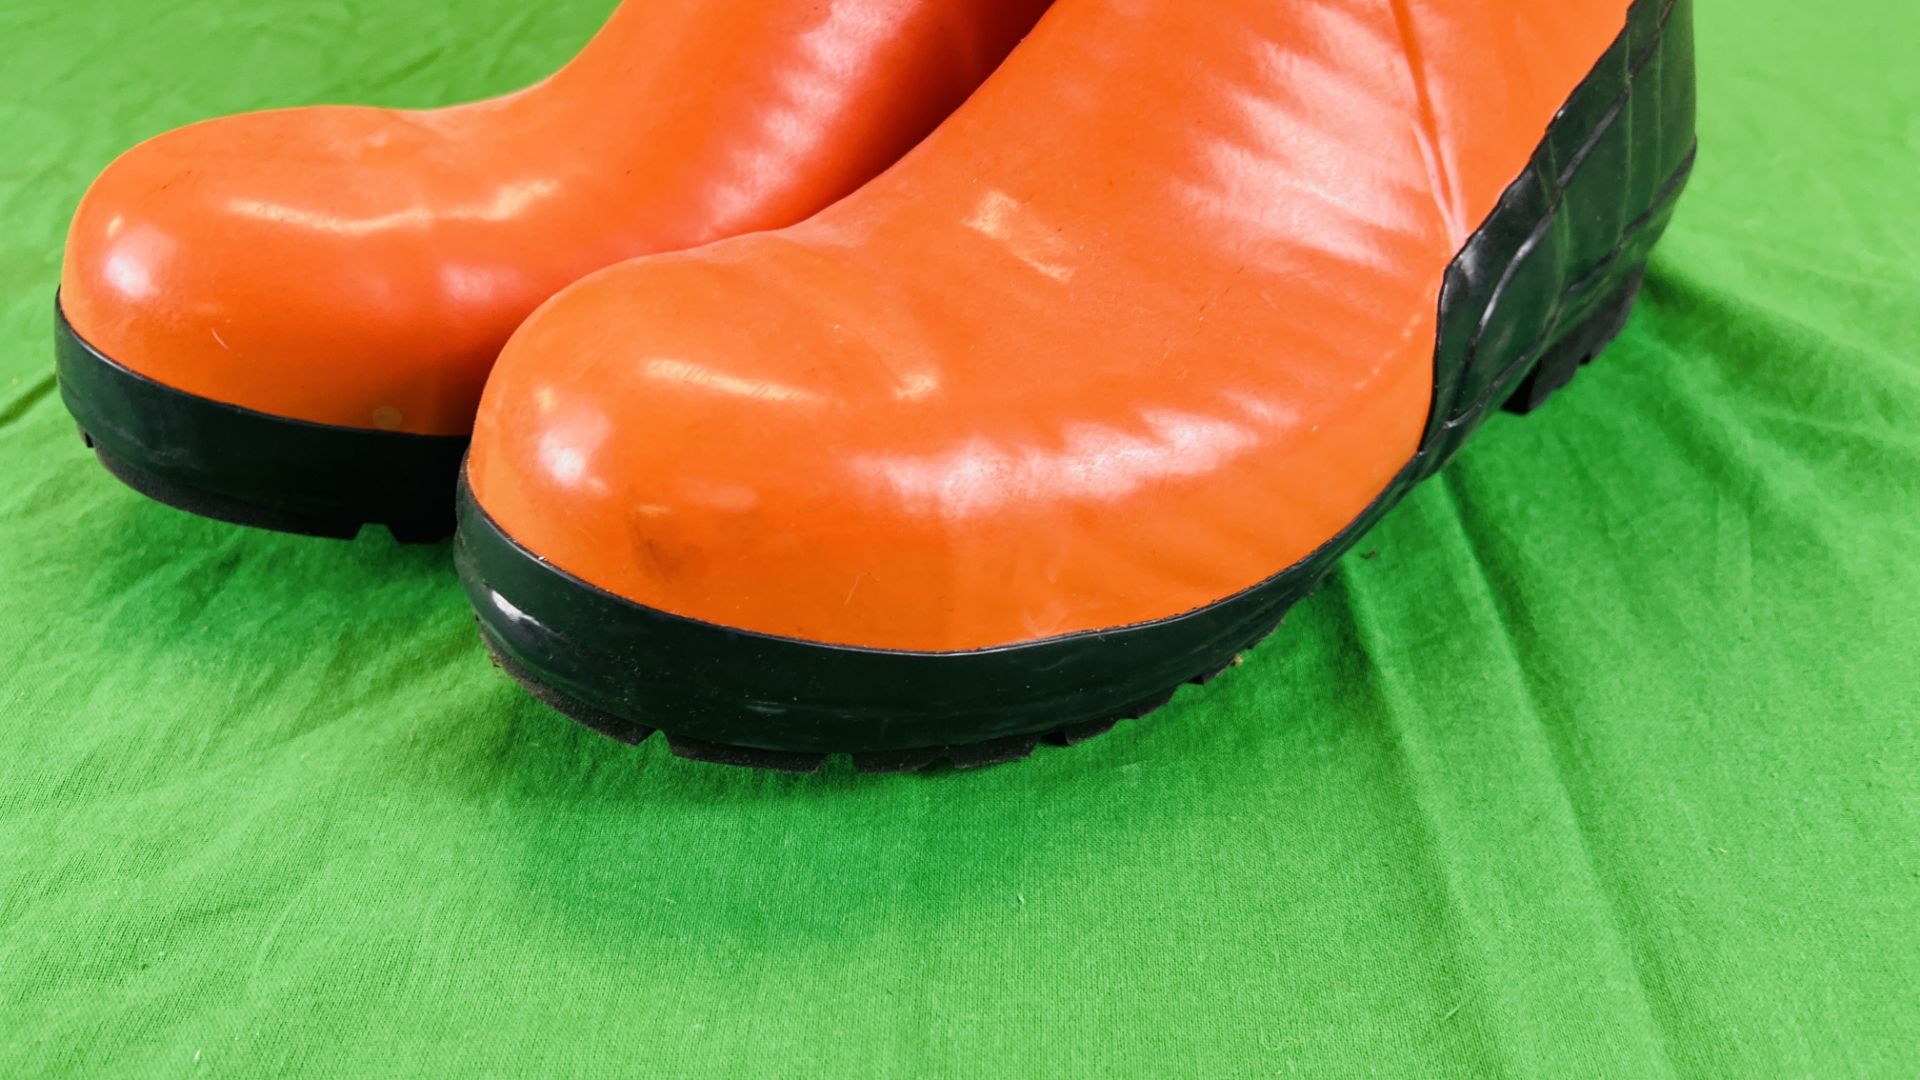 A PAIR OF AS NEW EURO FORESTER ORANGE SAFETY BOOTS, - Image 3 of 6